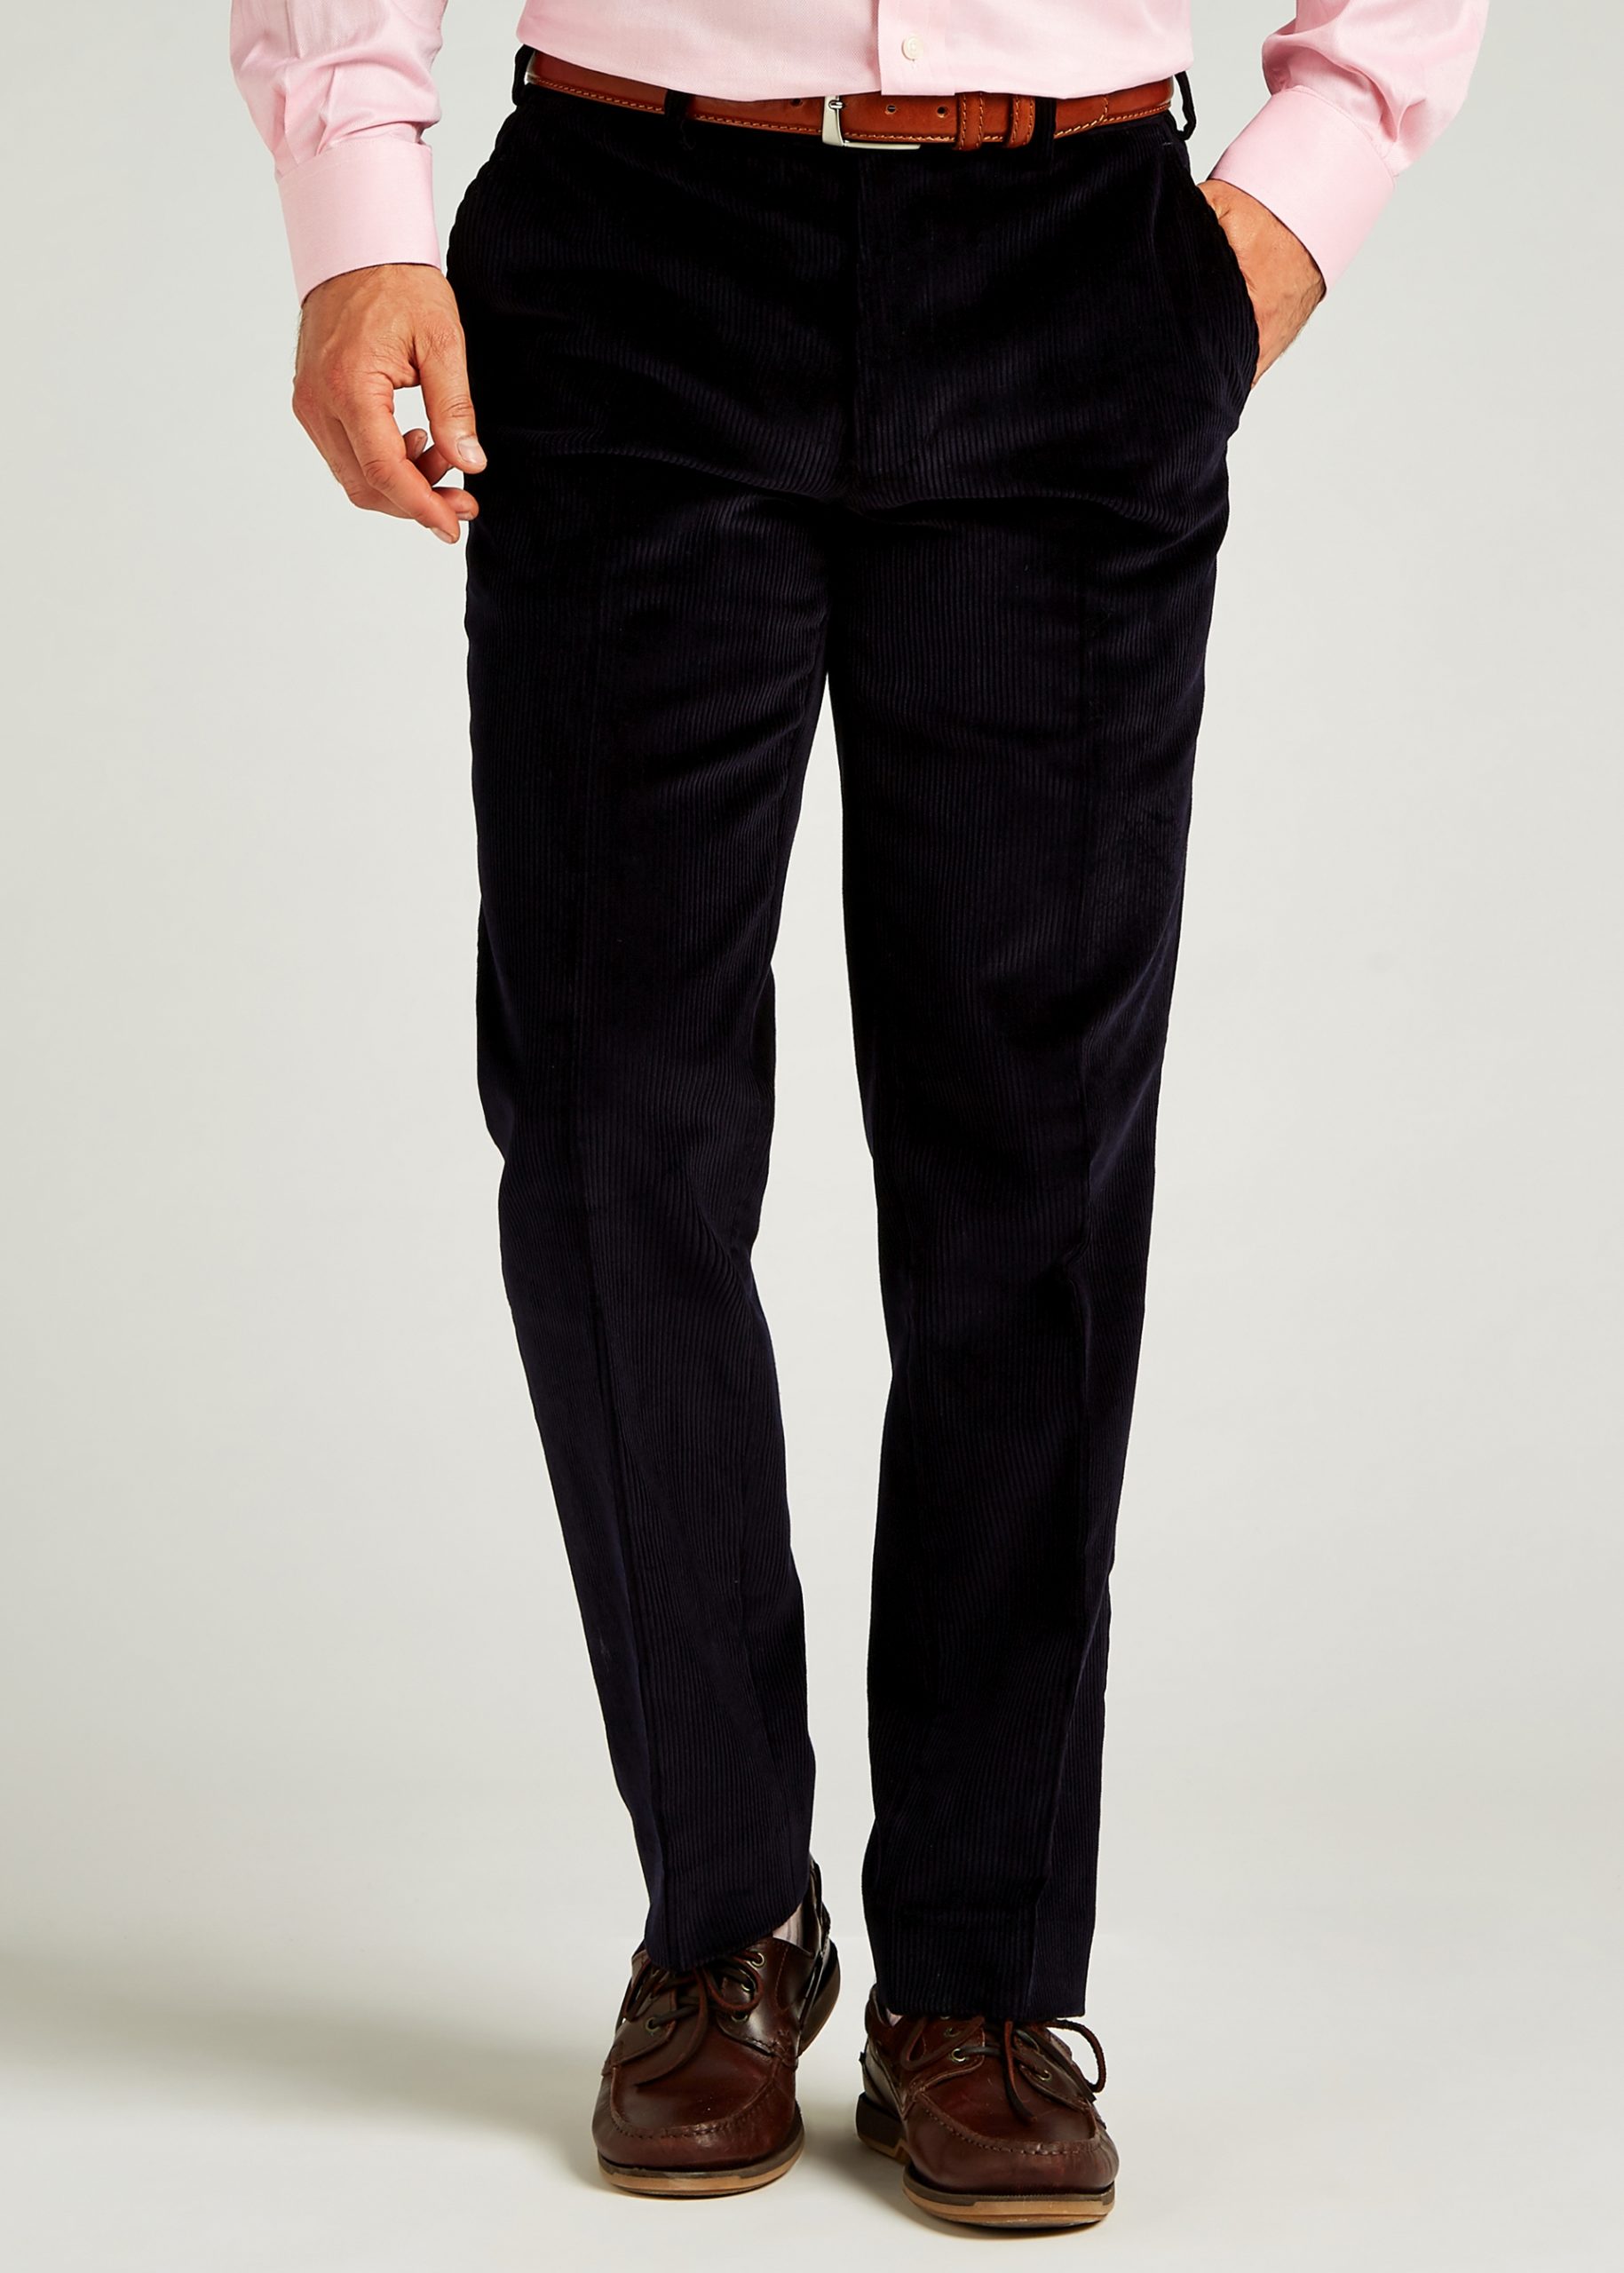 Navy corduroy trousers styled with brown leather belt